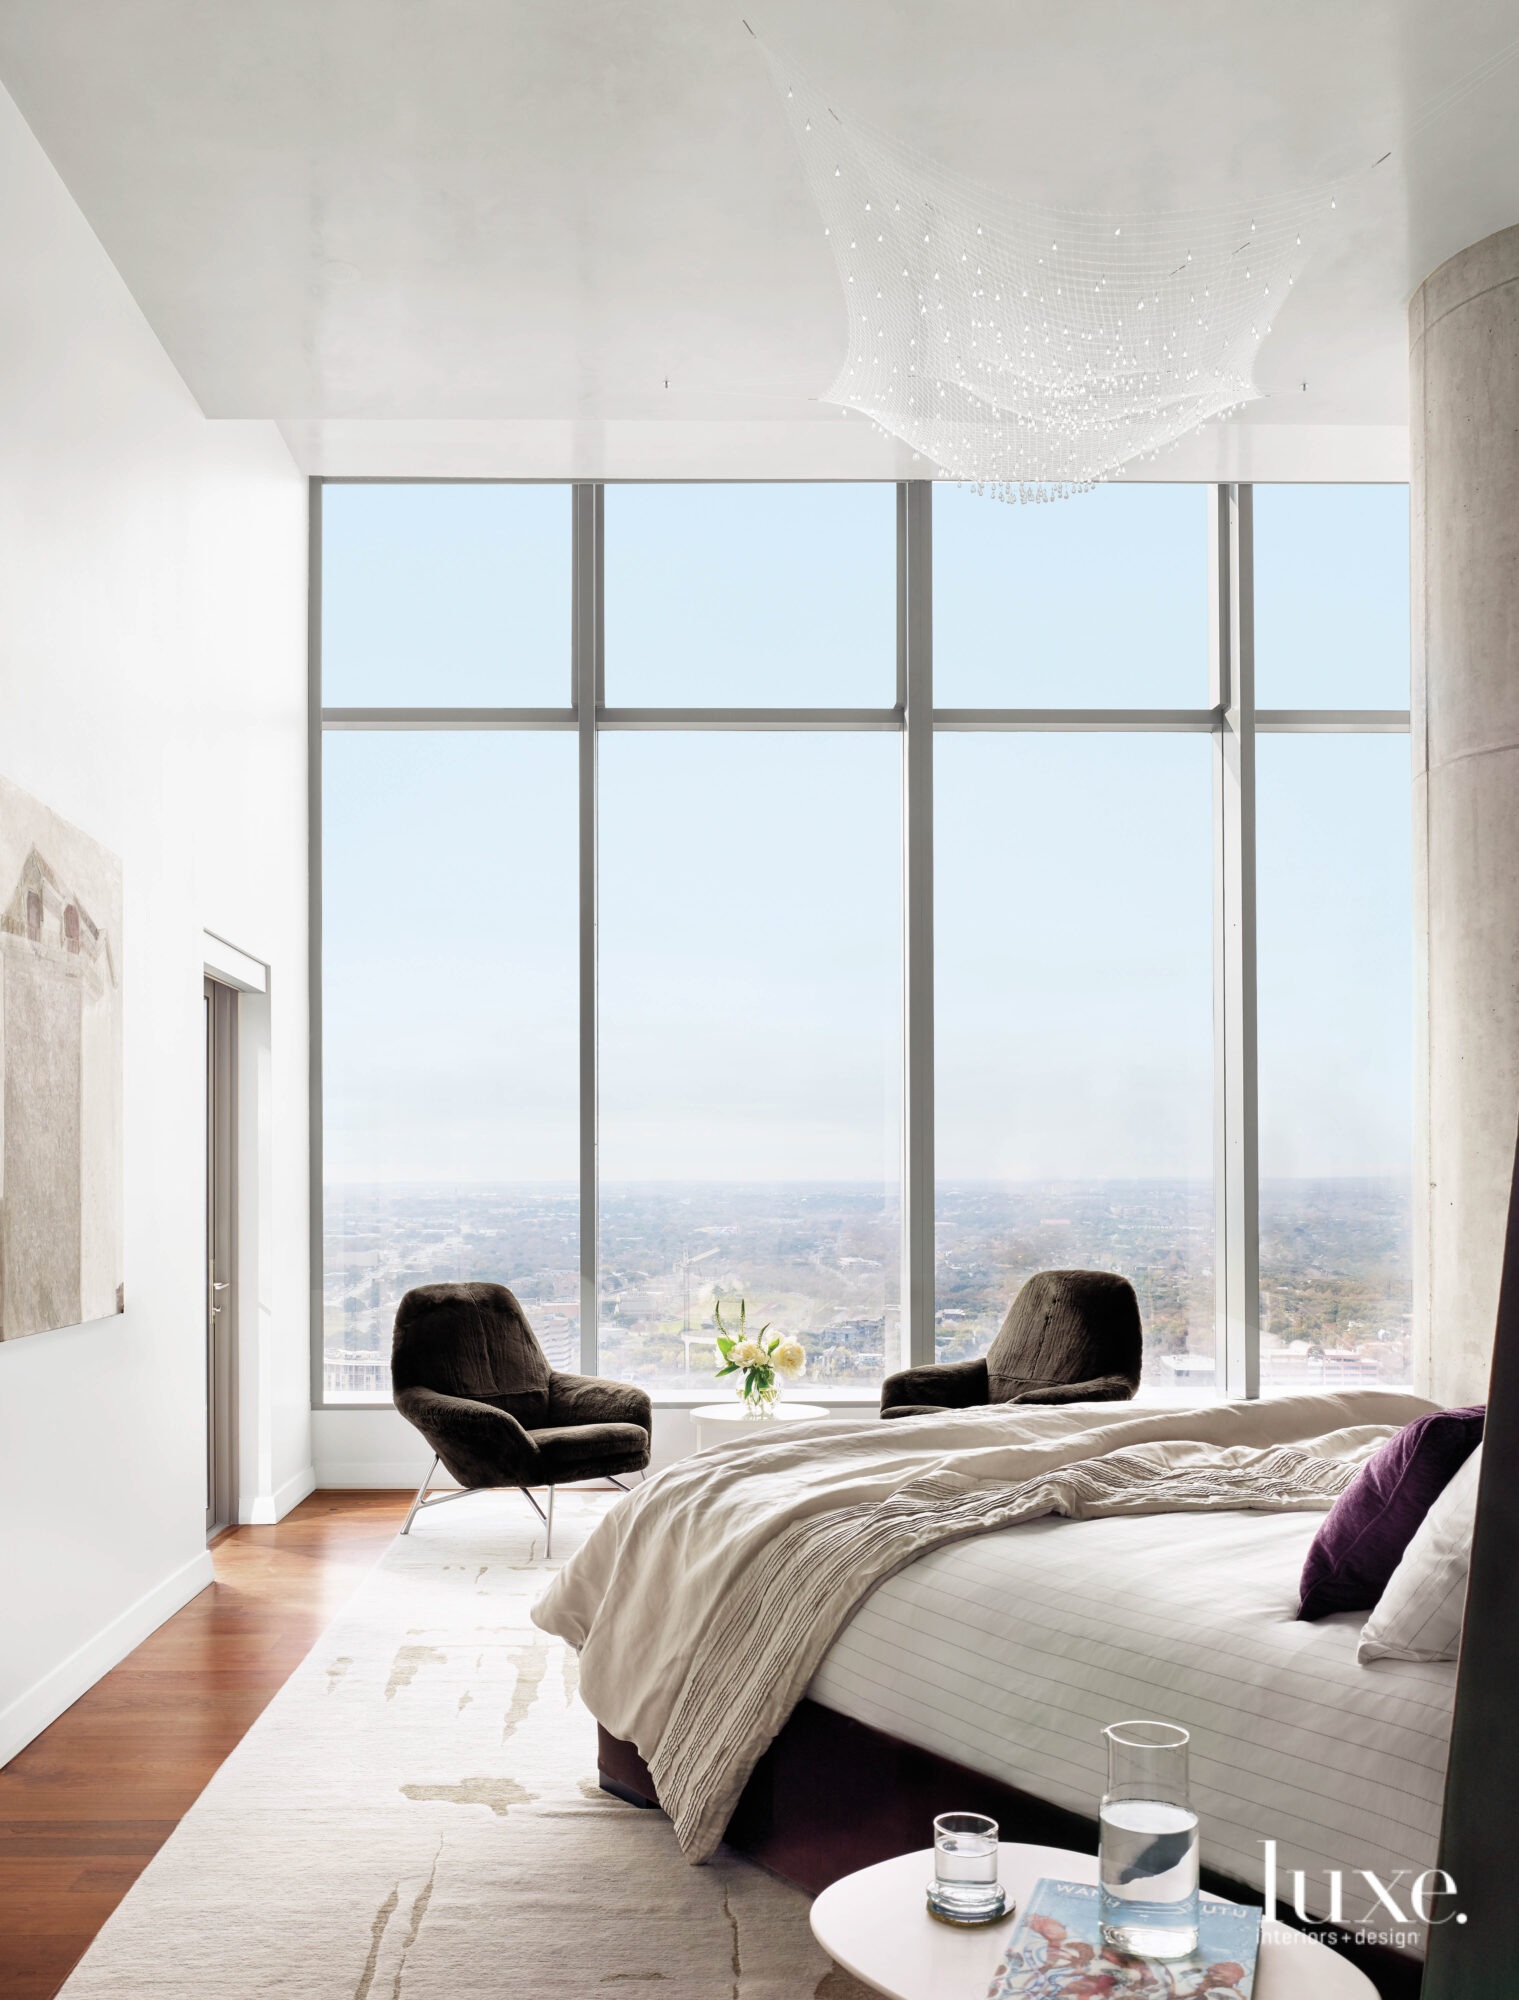 A serene bedroom with statement art and large windows.